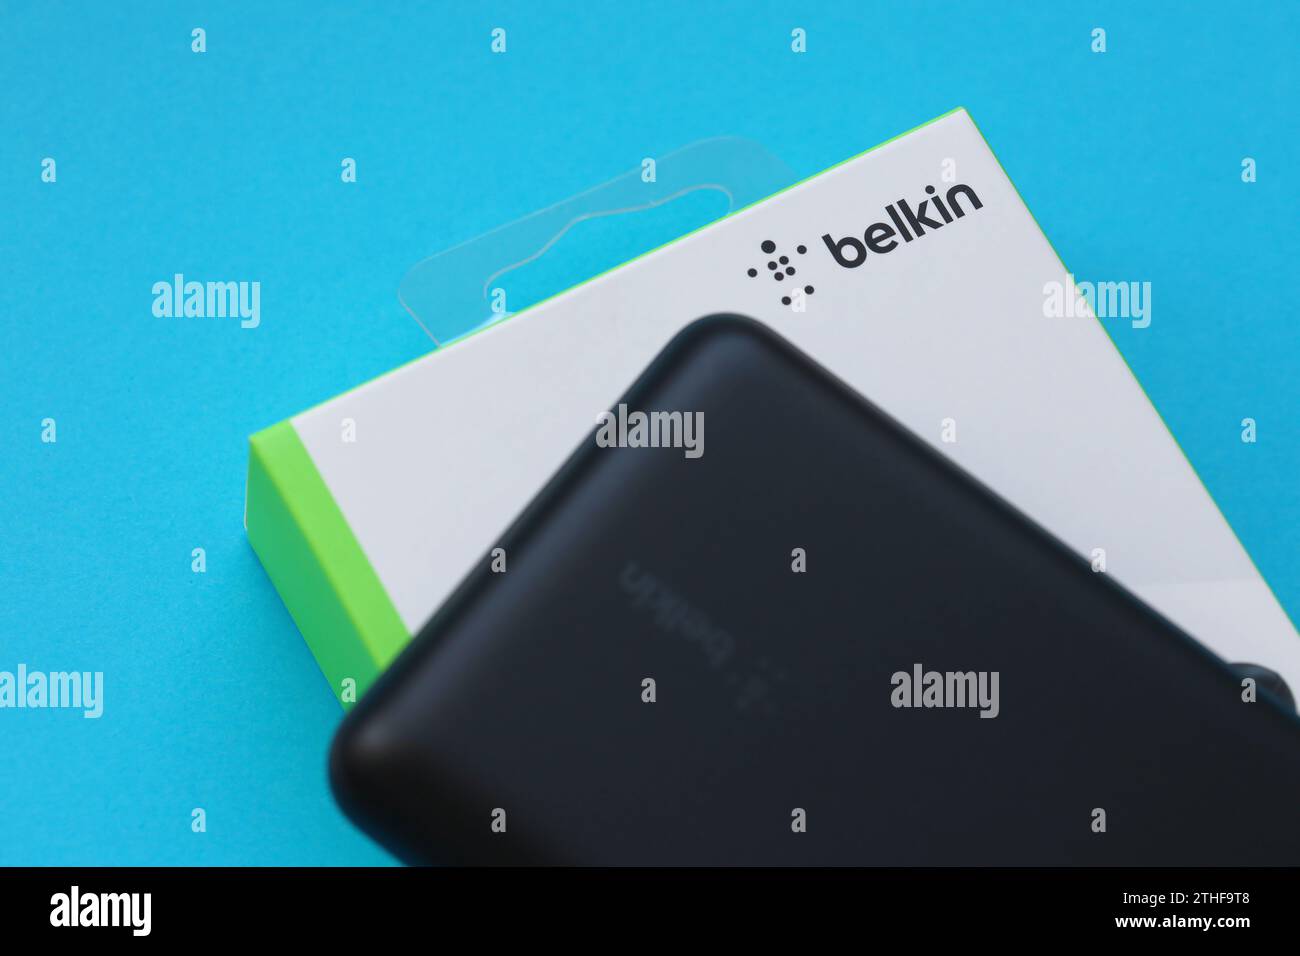 KYIV, UKRAINE - MAY 4, 2022 Portable Powerbank battery with logo of Belkin International, american manufacturer of consumer electronics that specializes in connectivity devices Stock Photo